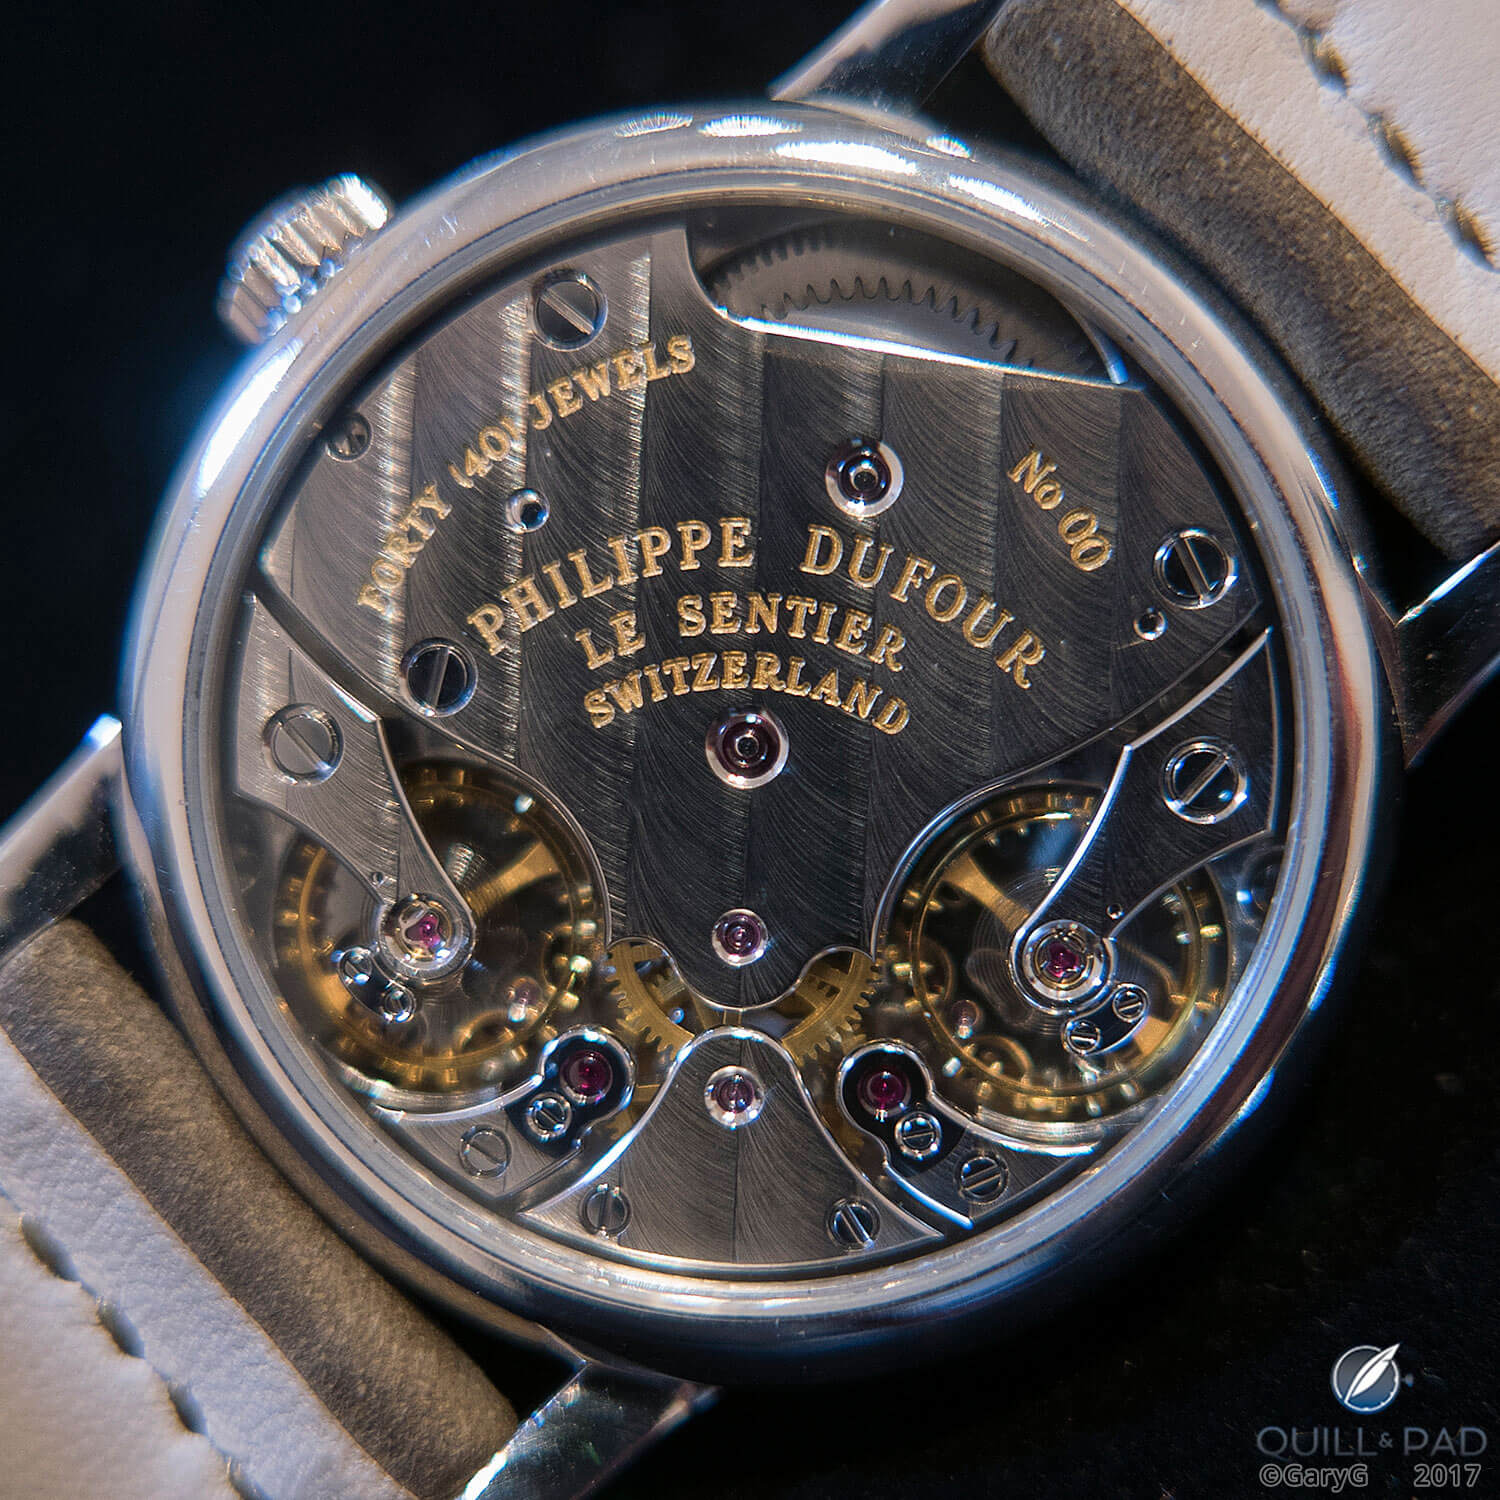 Movement side, Philippe Dufour Duality no. 00 in platinum